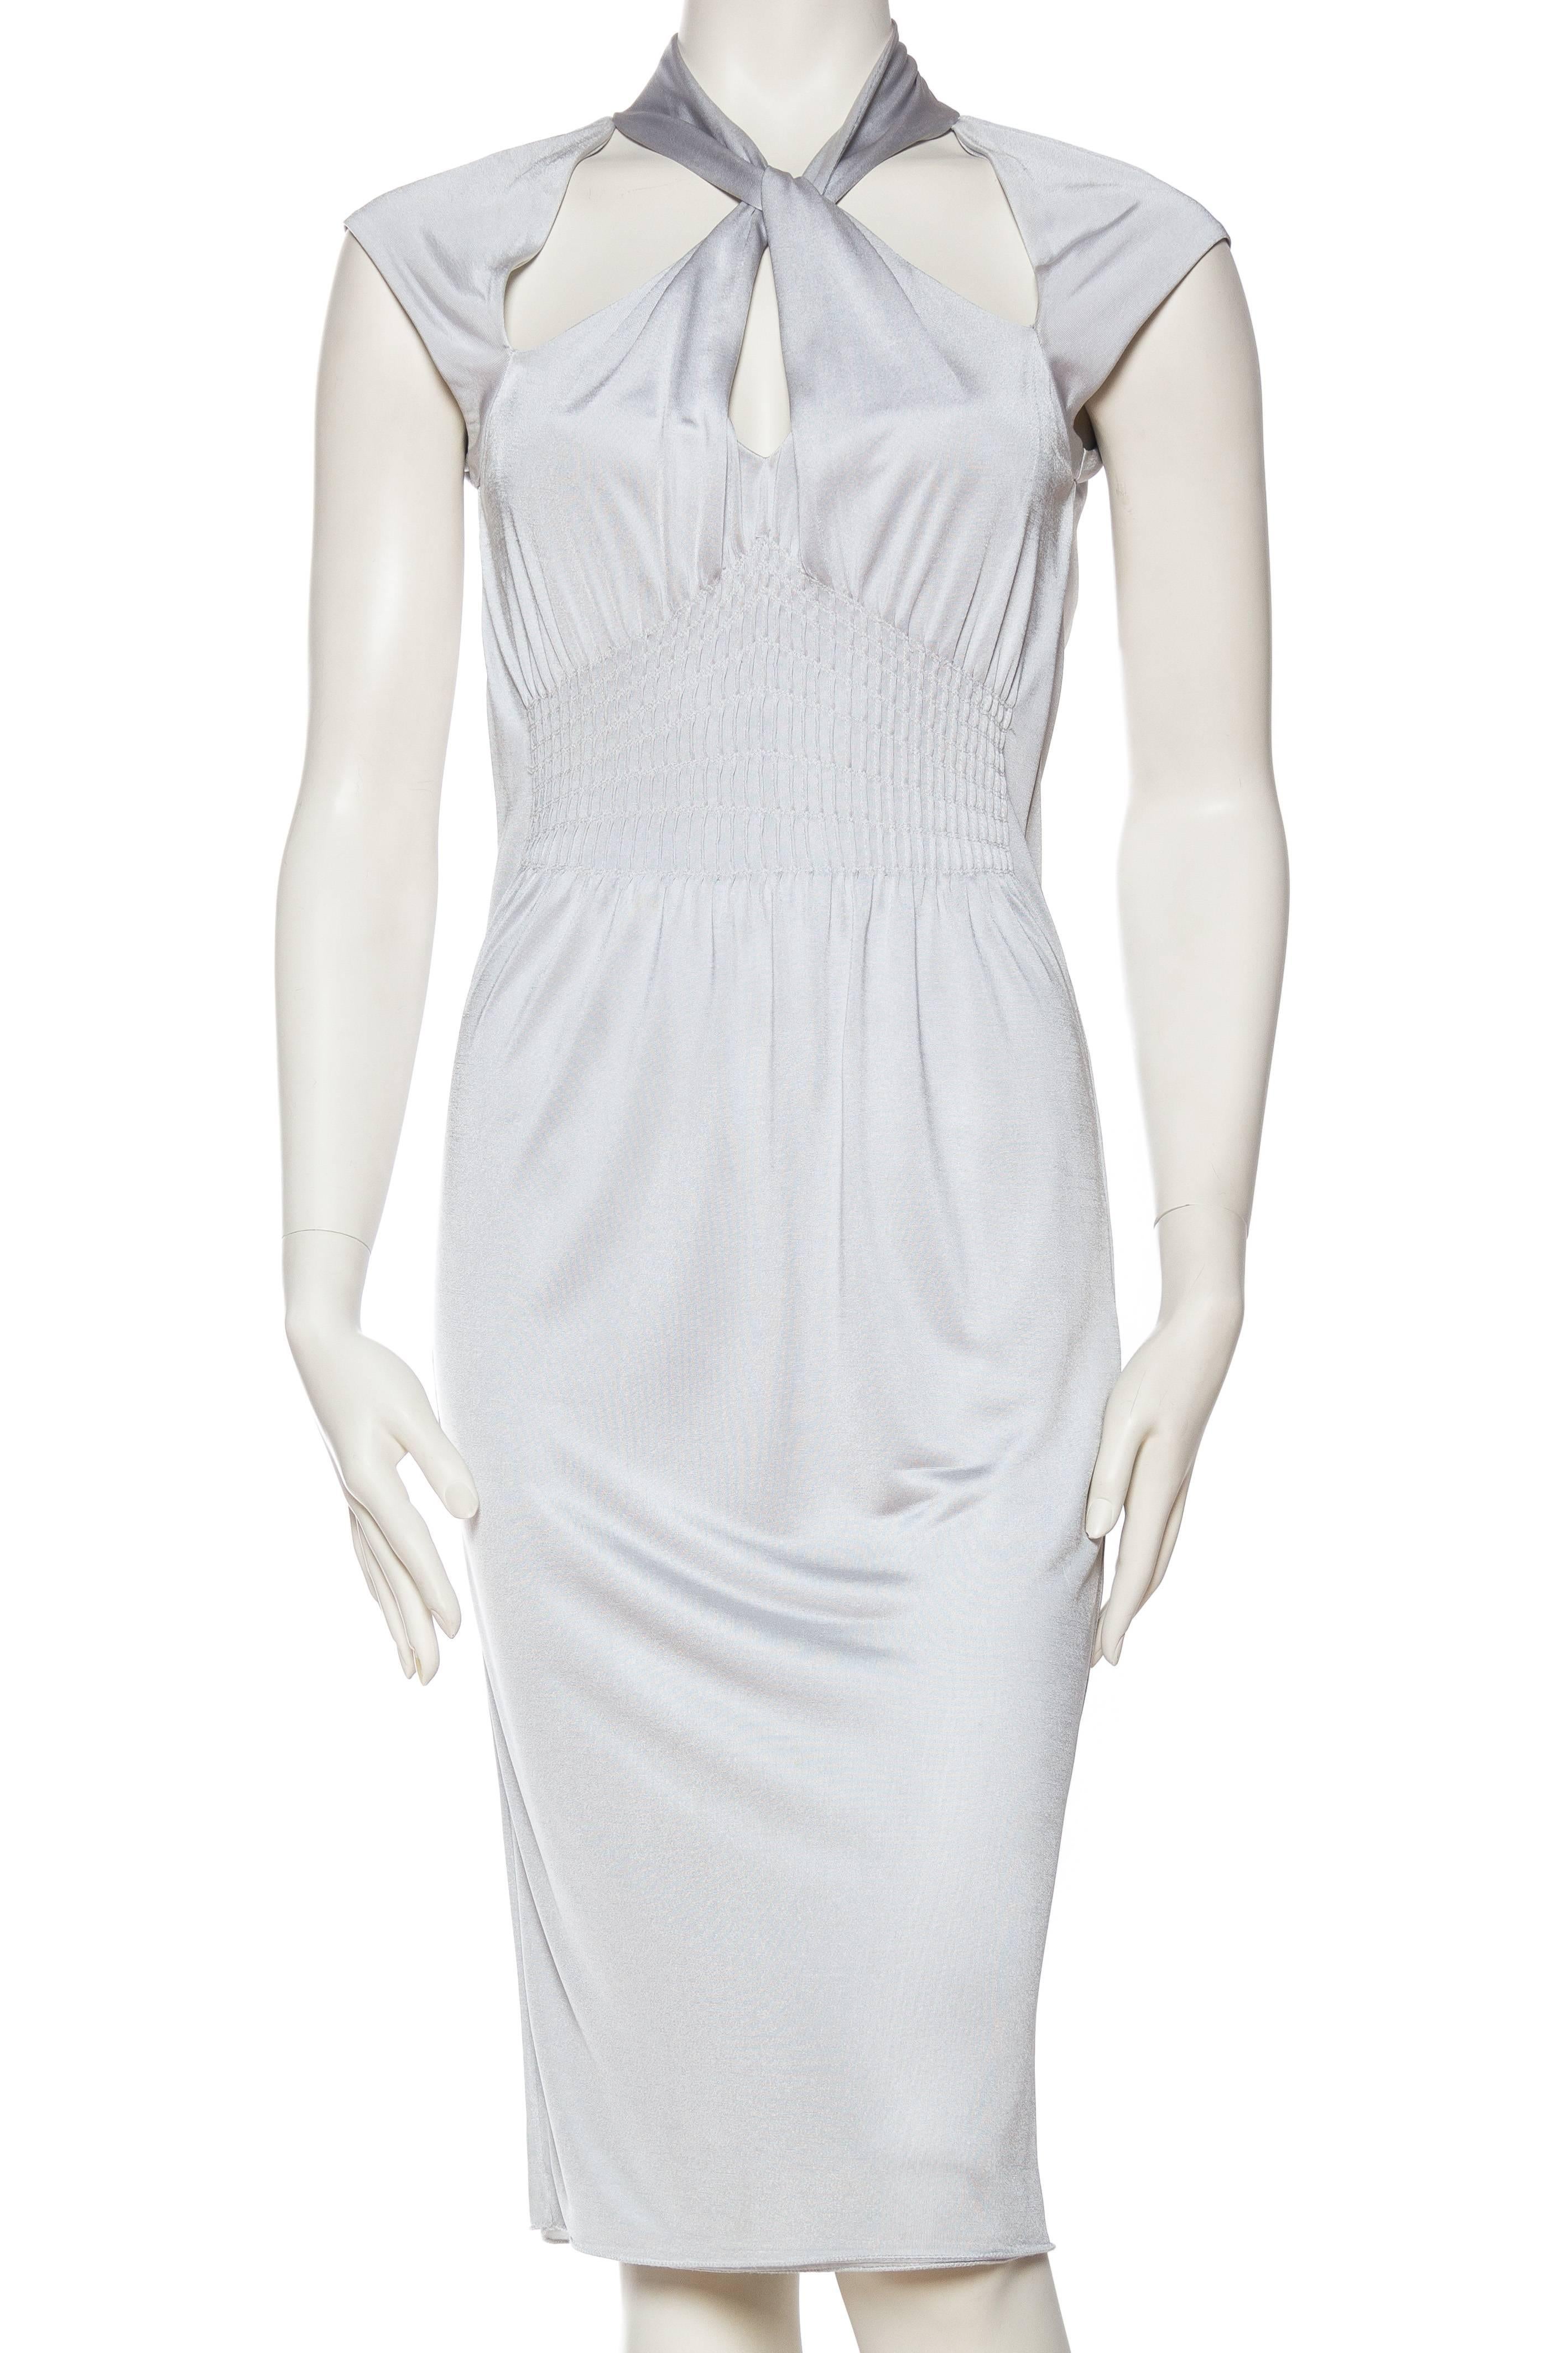 Gray 2000S TOM FORD GUCCI Dove Grey Rayon Jersey Backless Dress